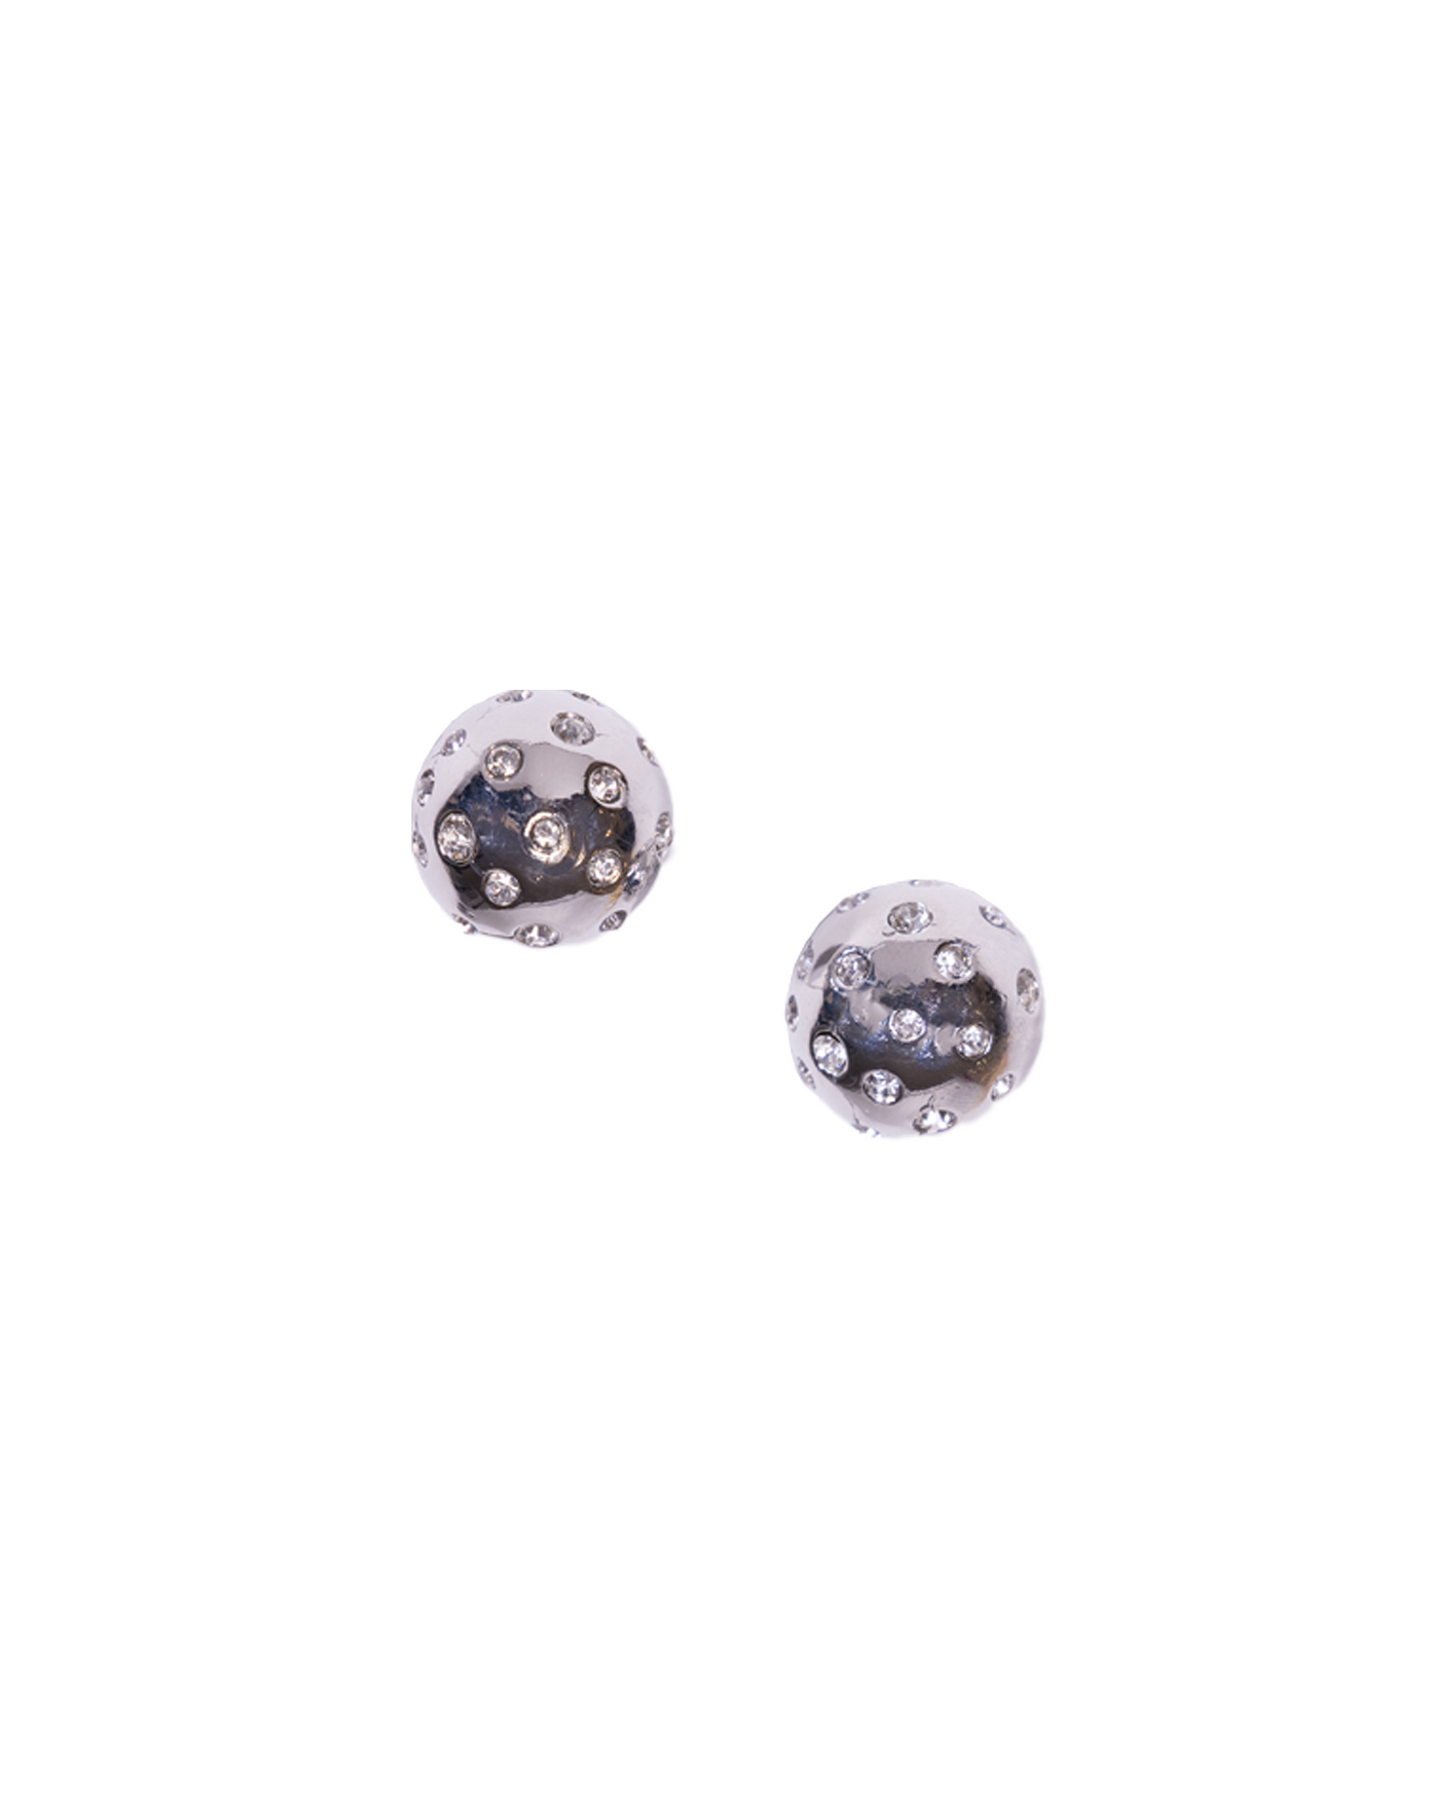 Round silver with white stones stud earrings